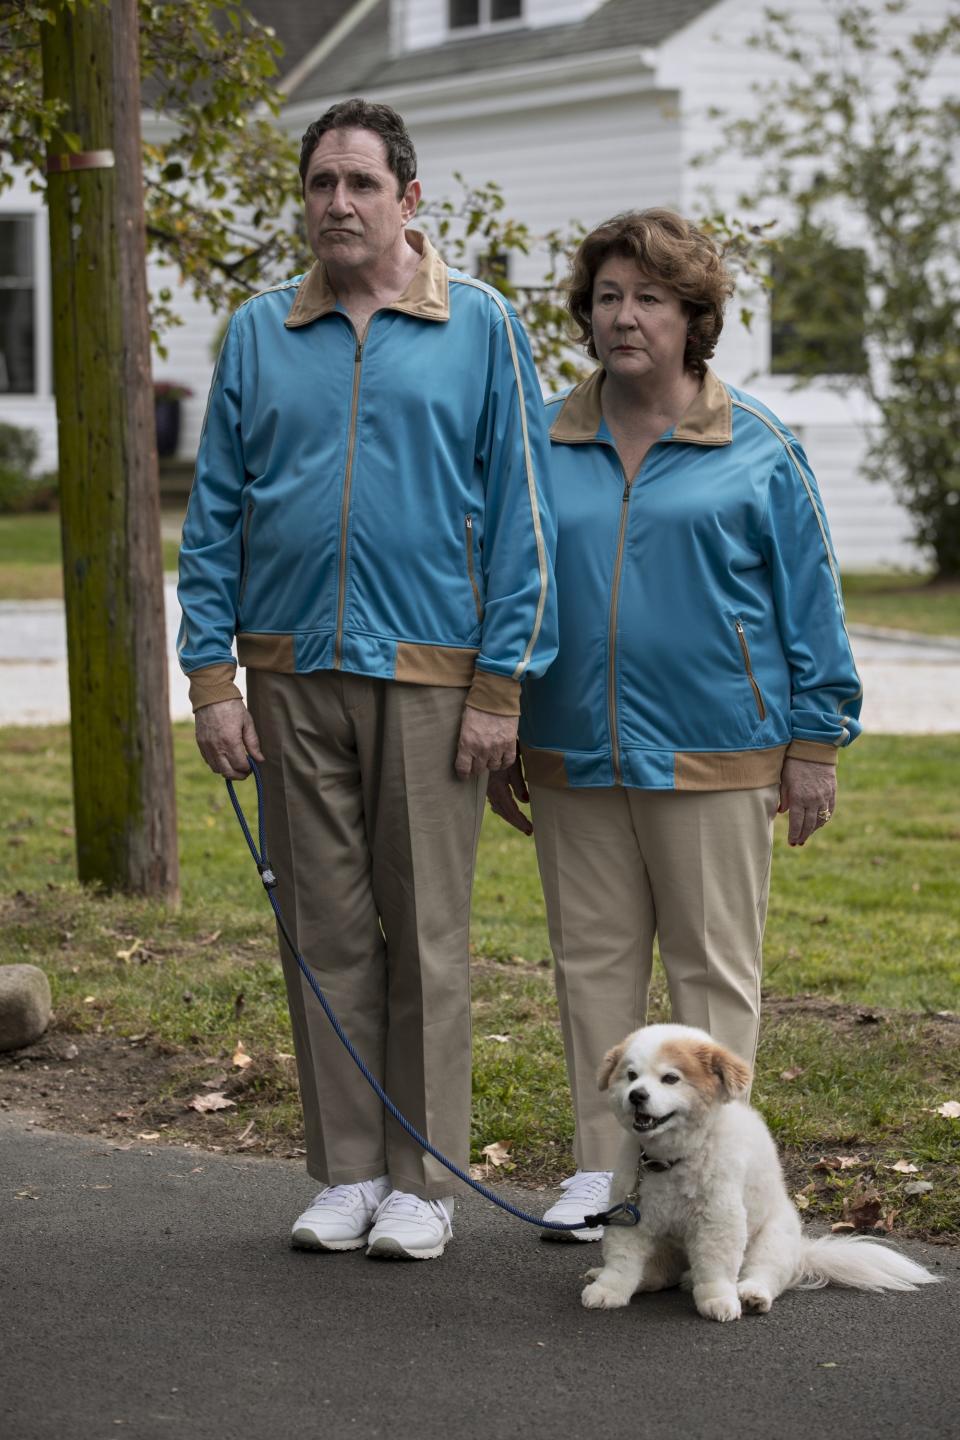 Kind and Martindale in matching jogging suits and walking their dog in "The Watcher"